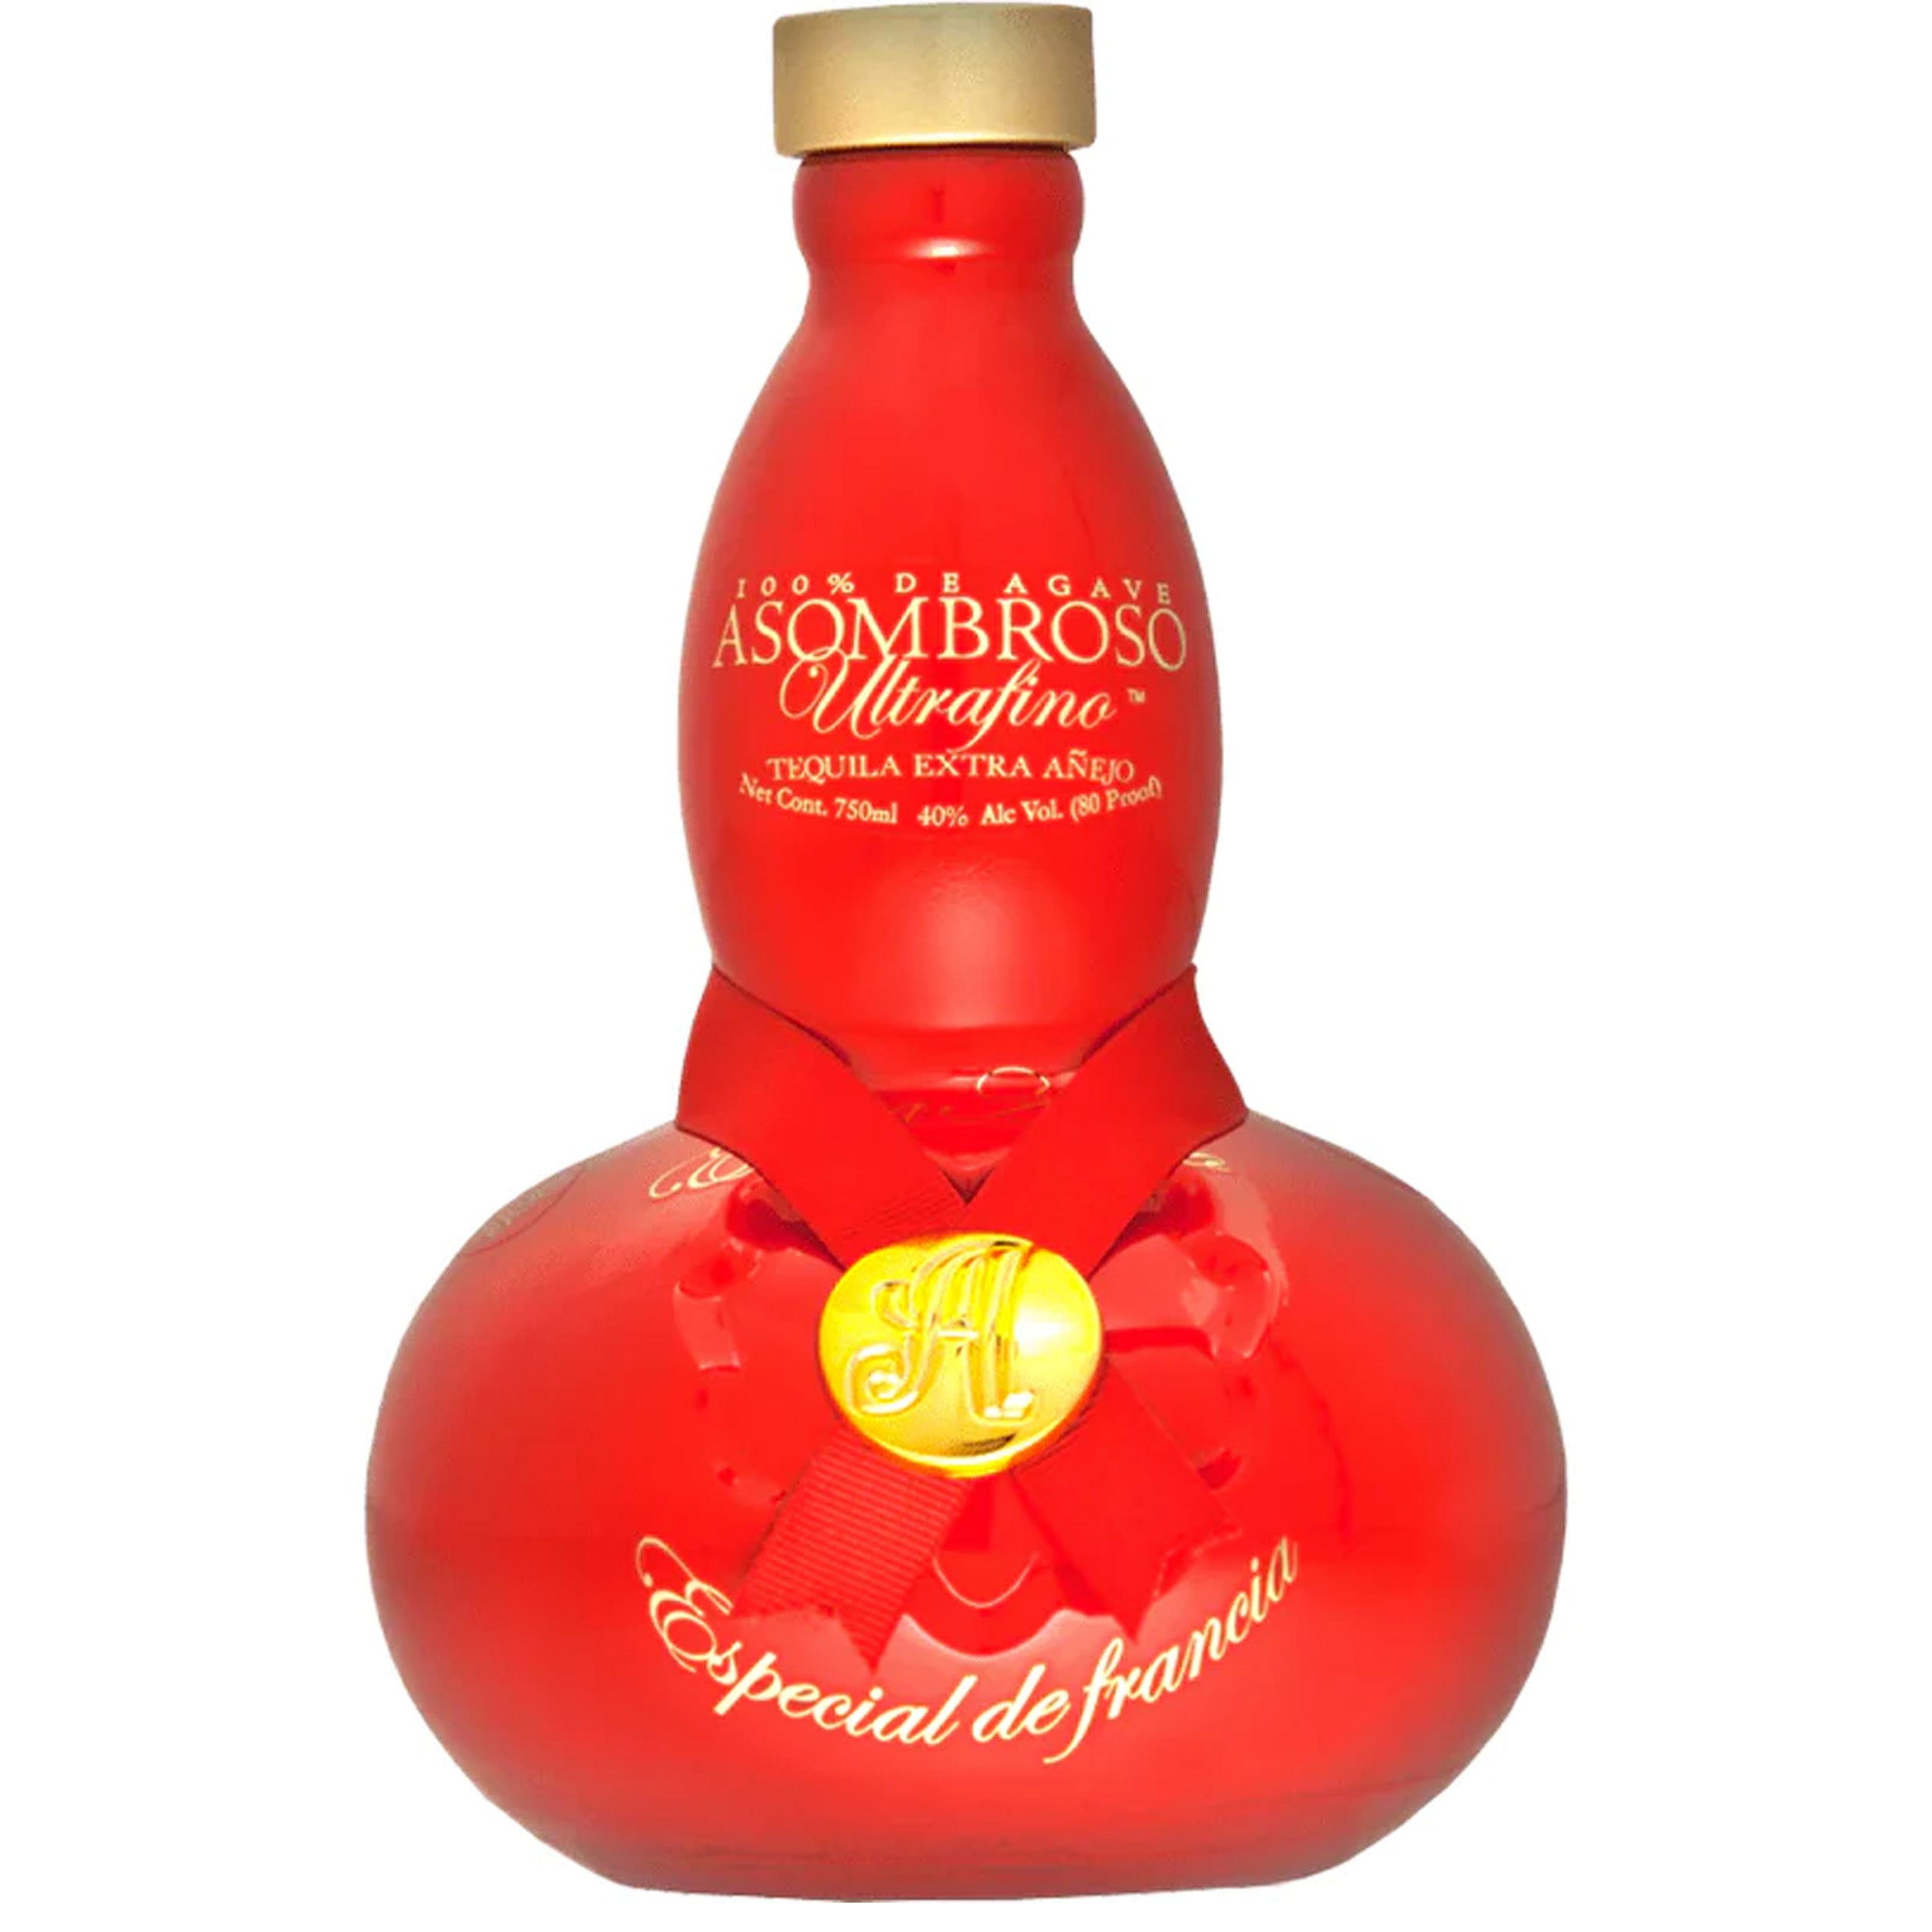 Asombroso Especial de Rouge 10 Year Old Extra Anejo Tequila